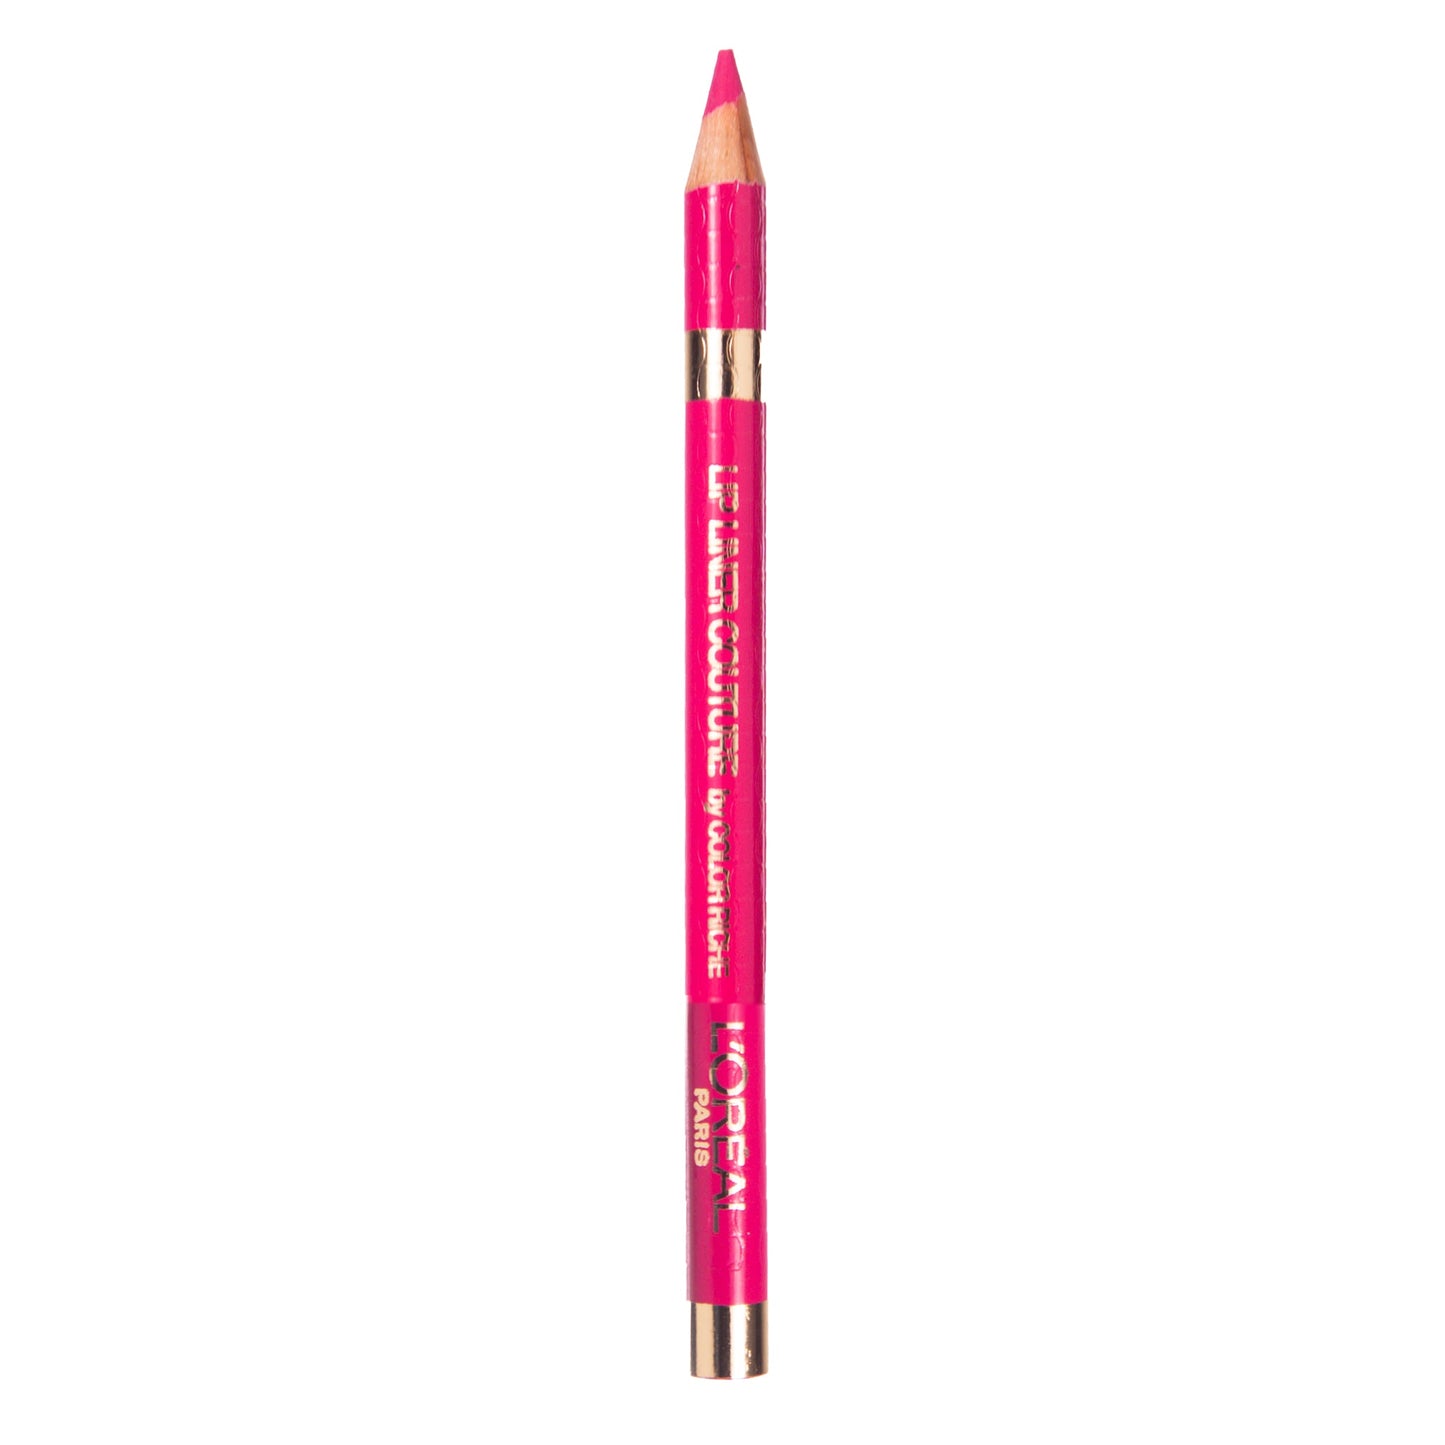 L'Oreal Color Riche Lip Liner Couture - 285 Pink Fever